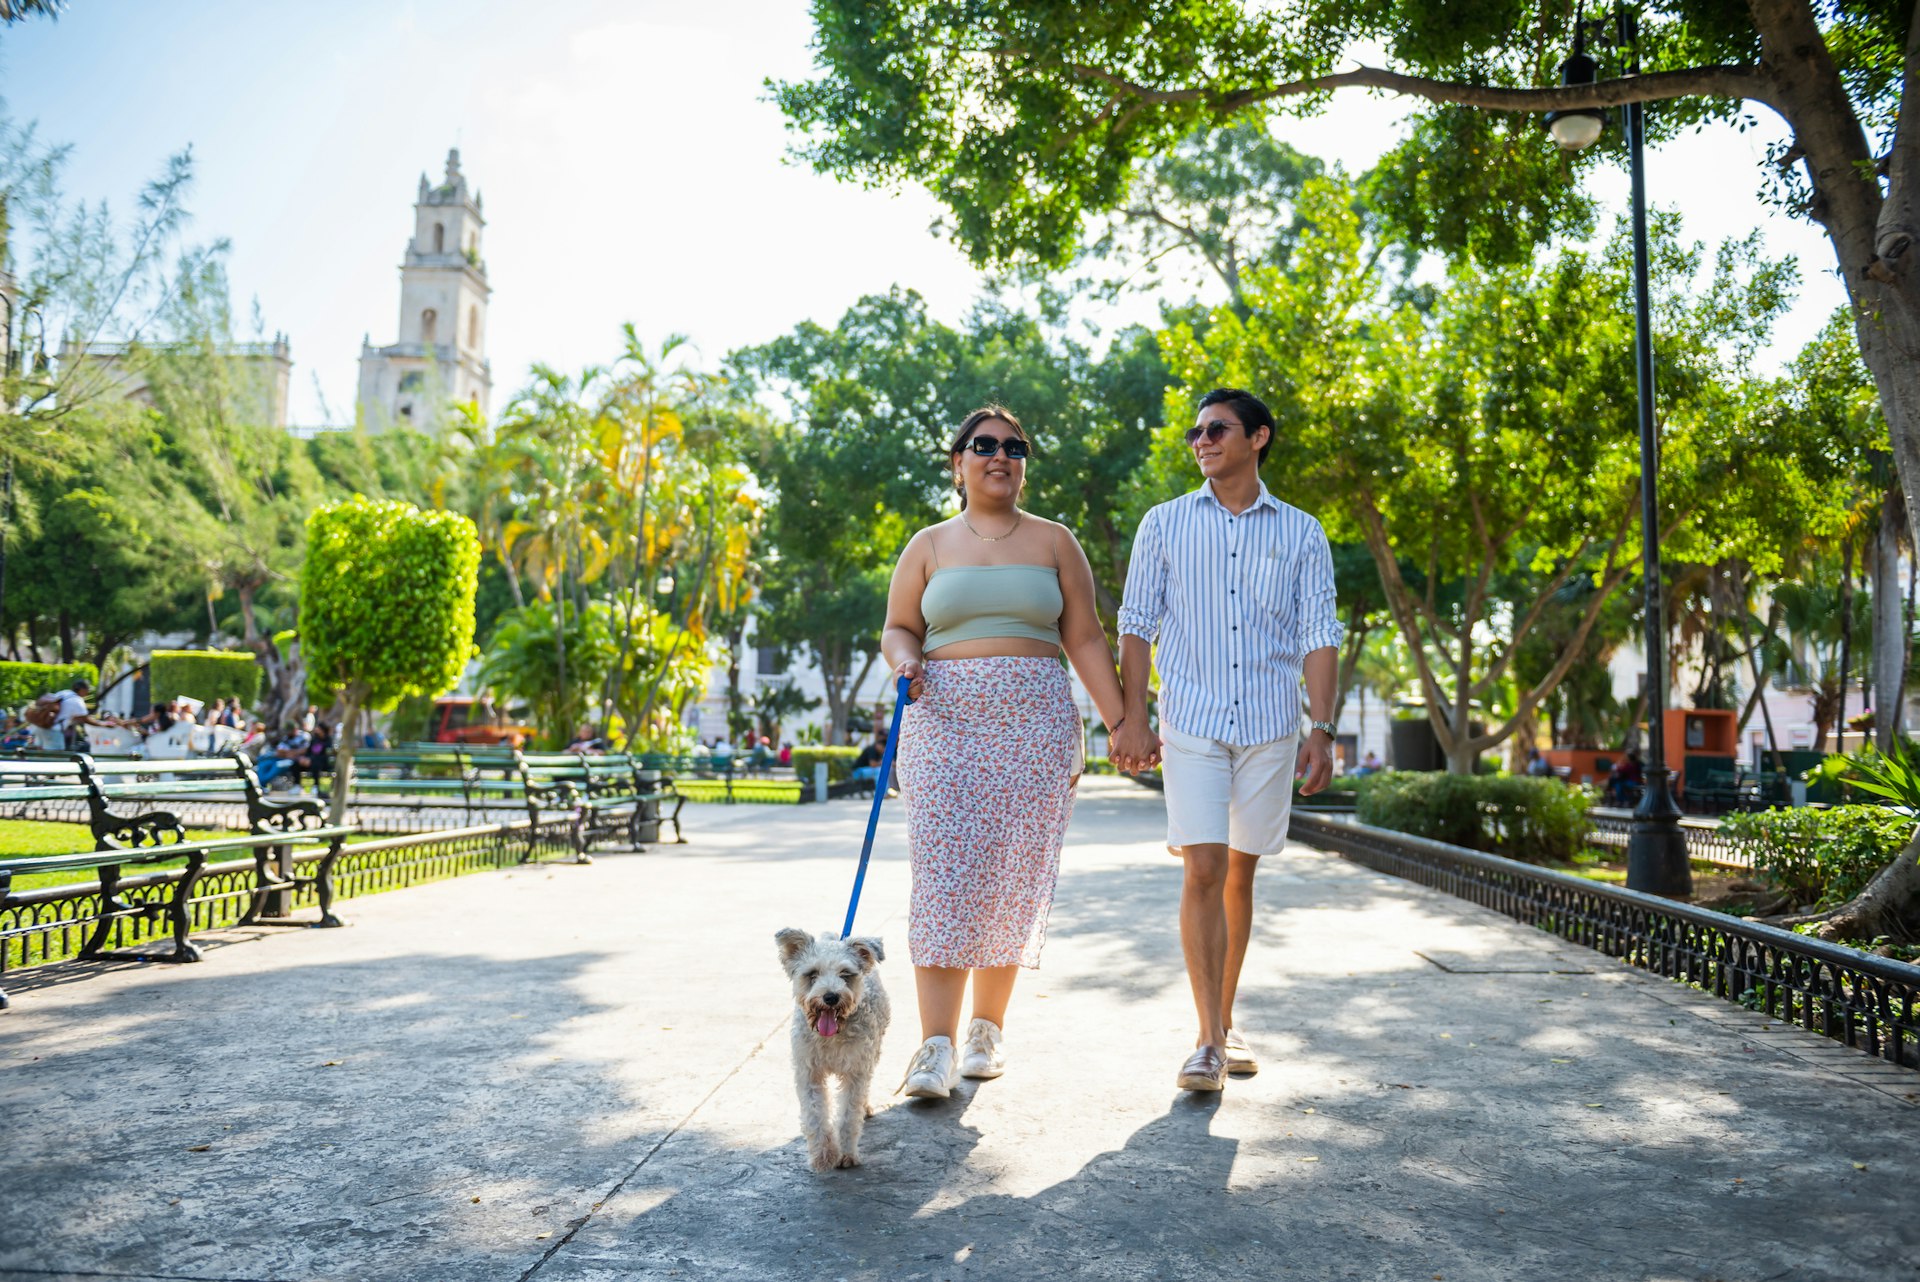 A young couple walk their dog near some colonial buildings in Merida, Mexico whilst holding hands